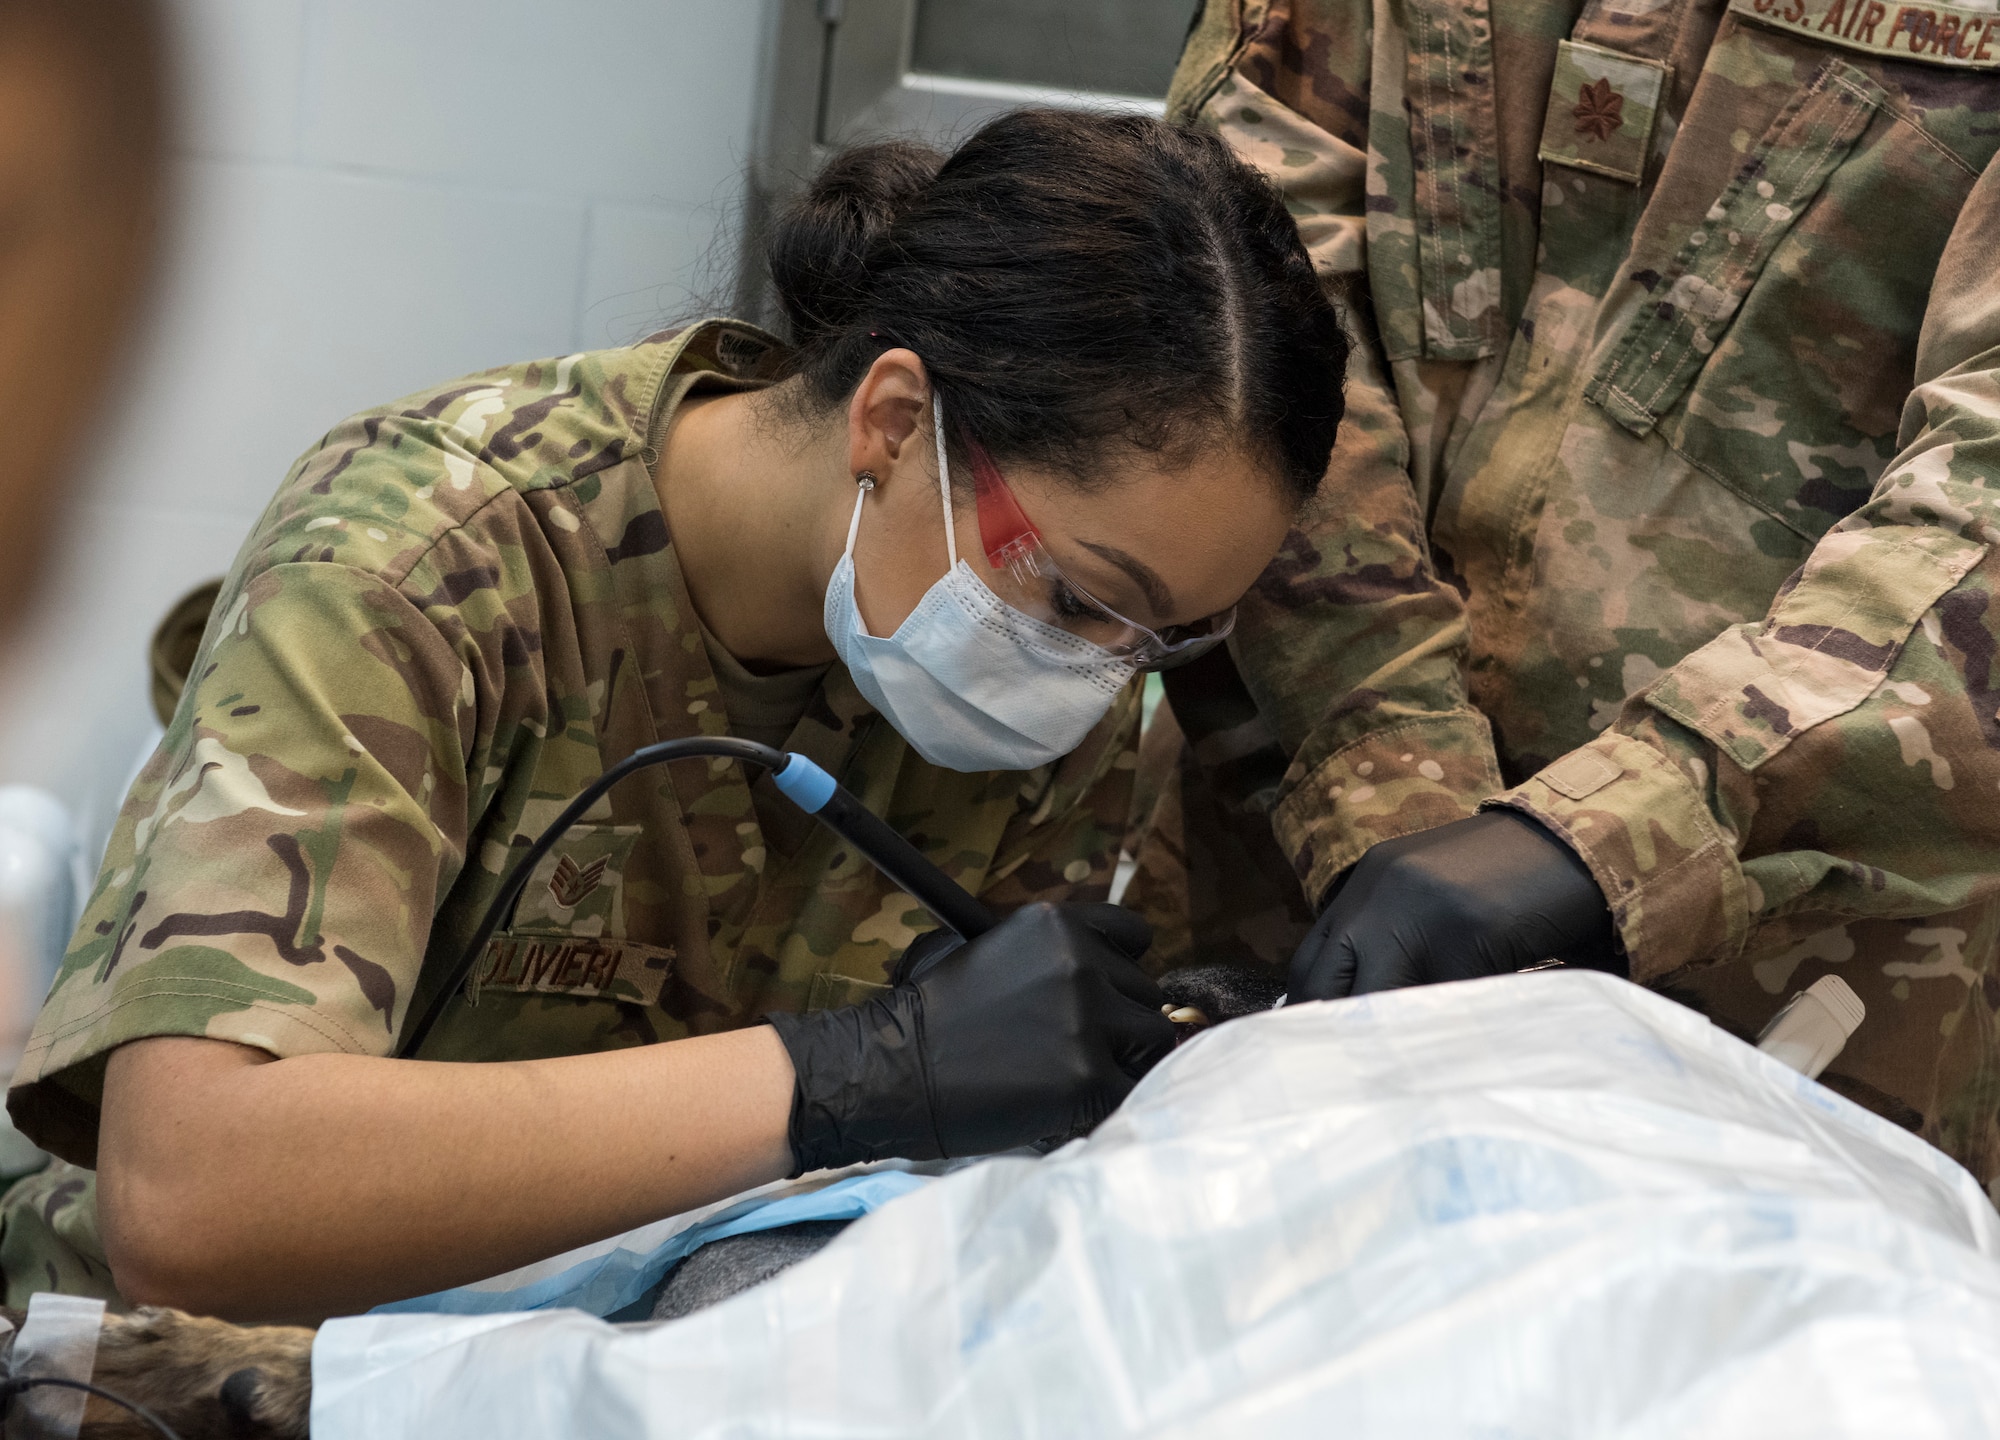 U.S. Air Force Staff Sgt. Torri Olievieri, 386th Expeditionary Medical Group dental services non-commissioned officer in charge, conducts a teeth cleaning at an Undisclosed Location in Southwest Asia, Dec. 7, 2018. While deployed, the veterinary clinic relies on the medical group for many of their medications and to be a contingency plan if they an emergent situation were to occur.